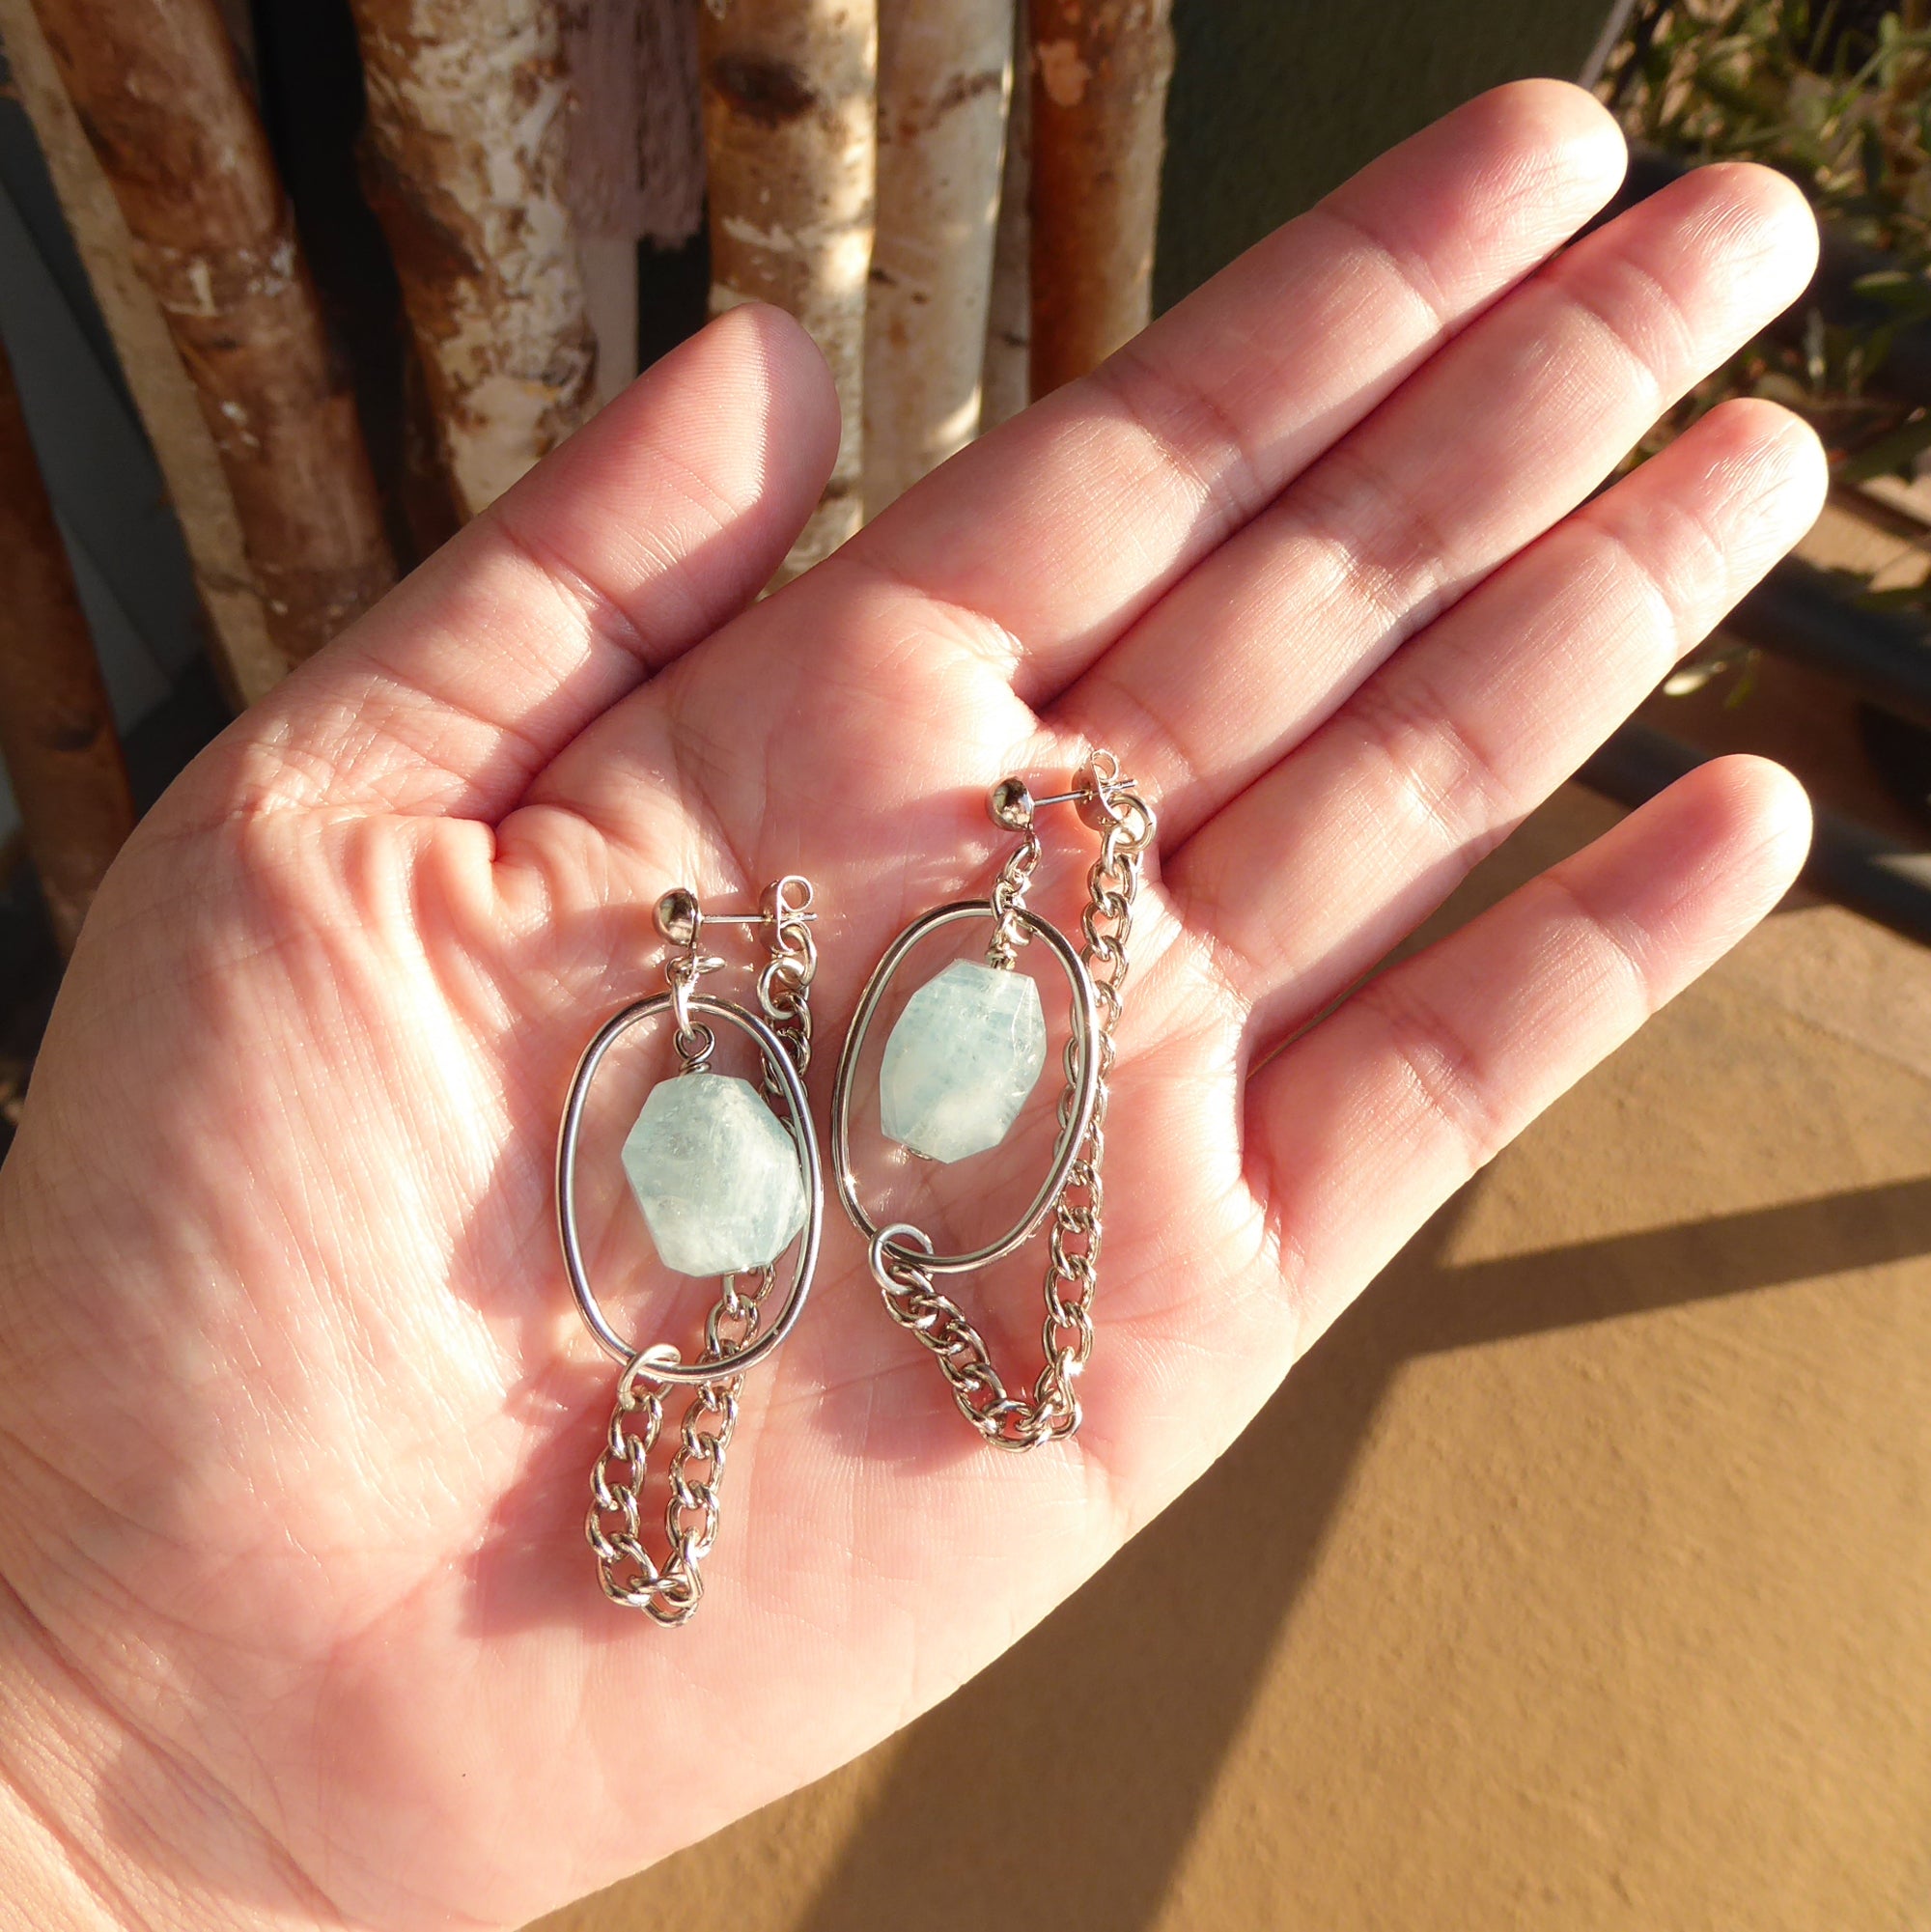 Silver saturn earrings in aquamarine by Jenny Dayco 6